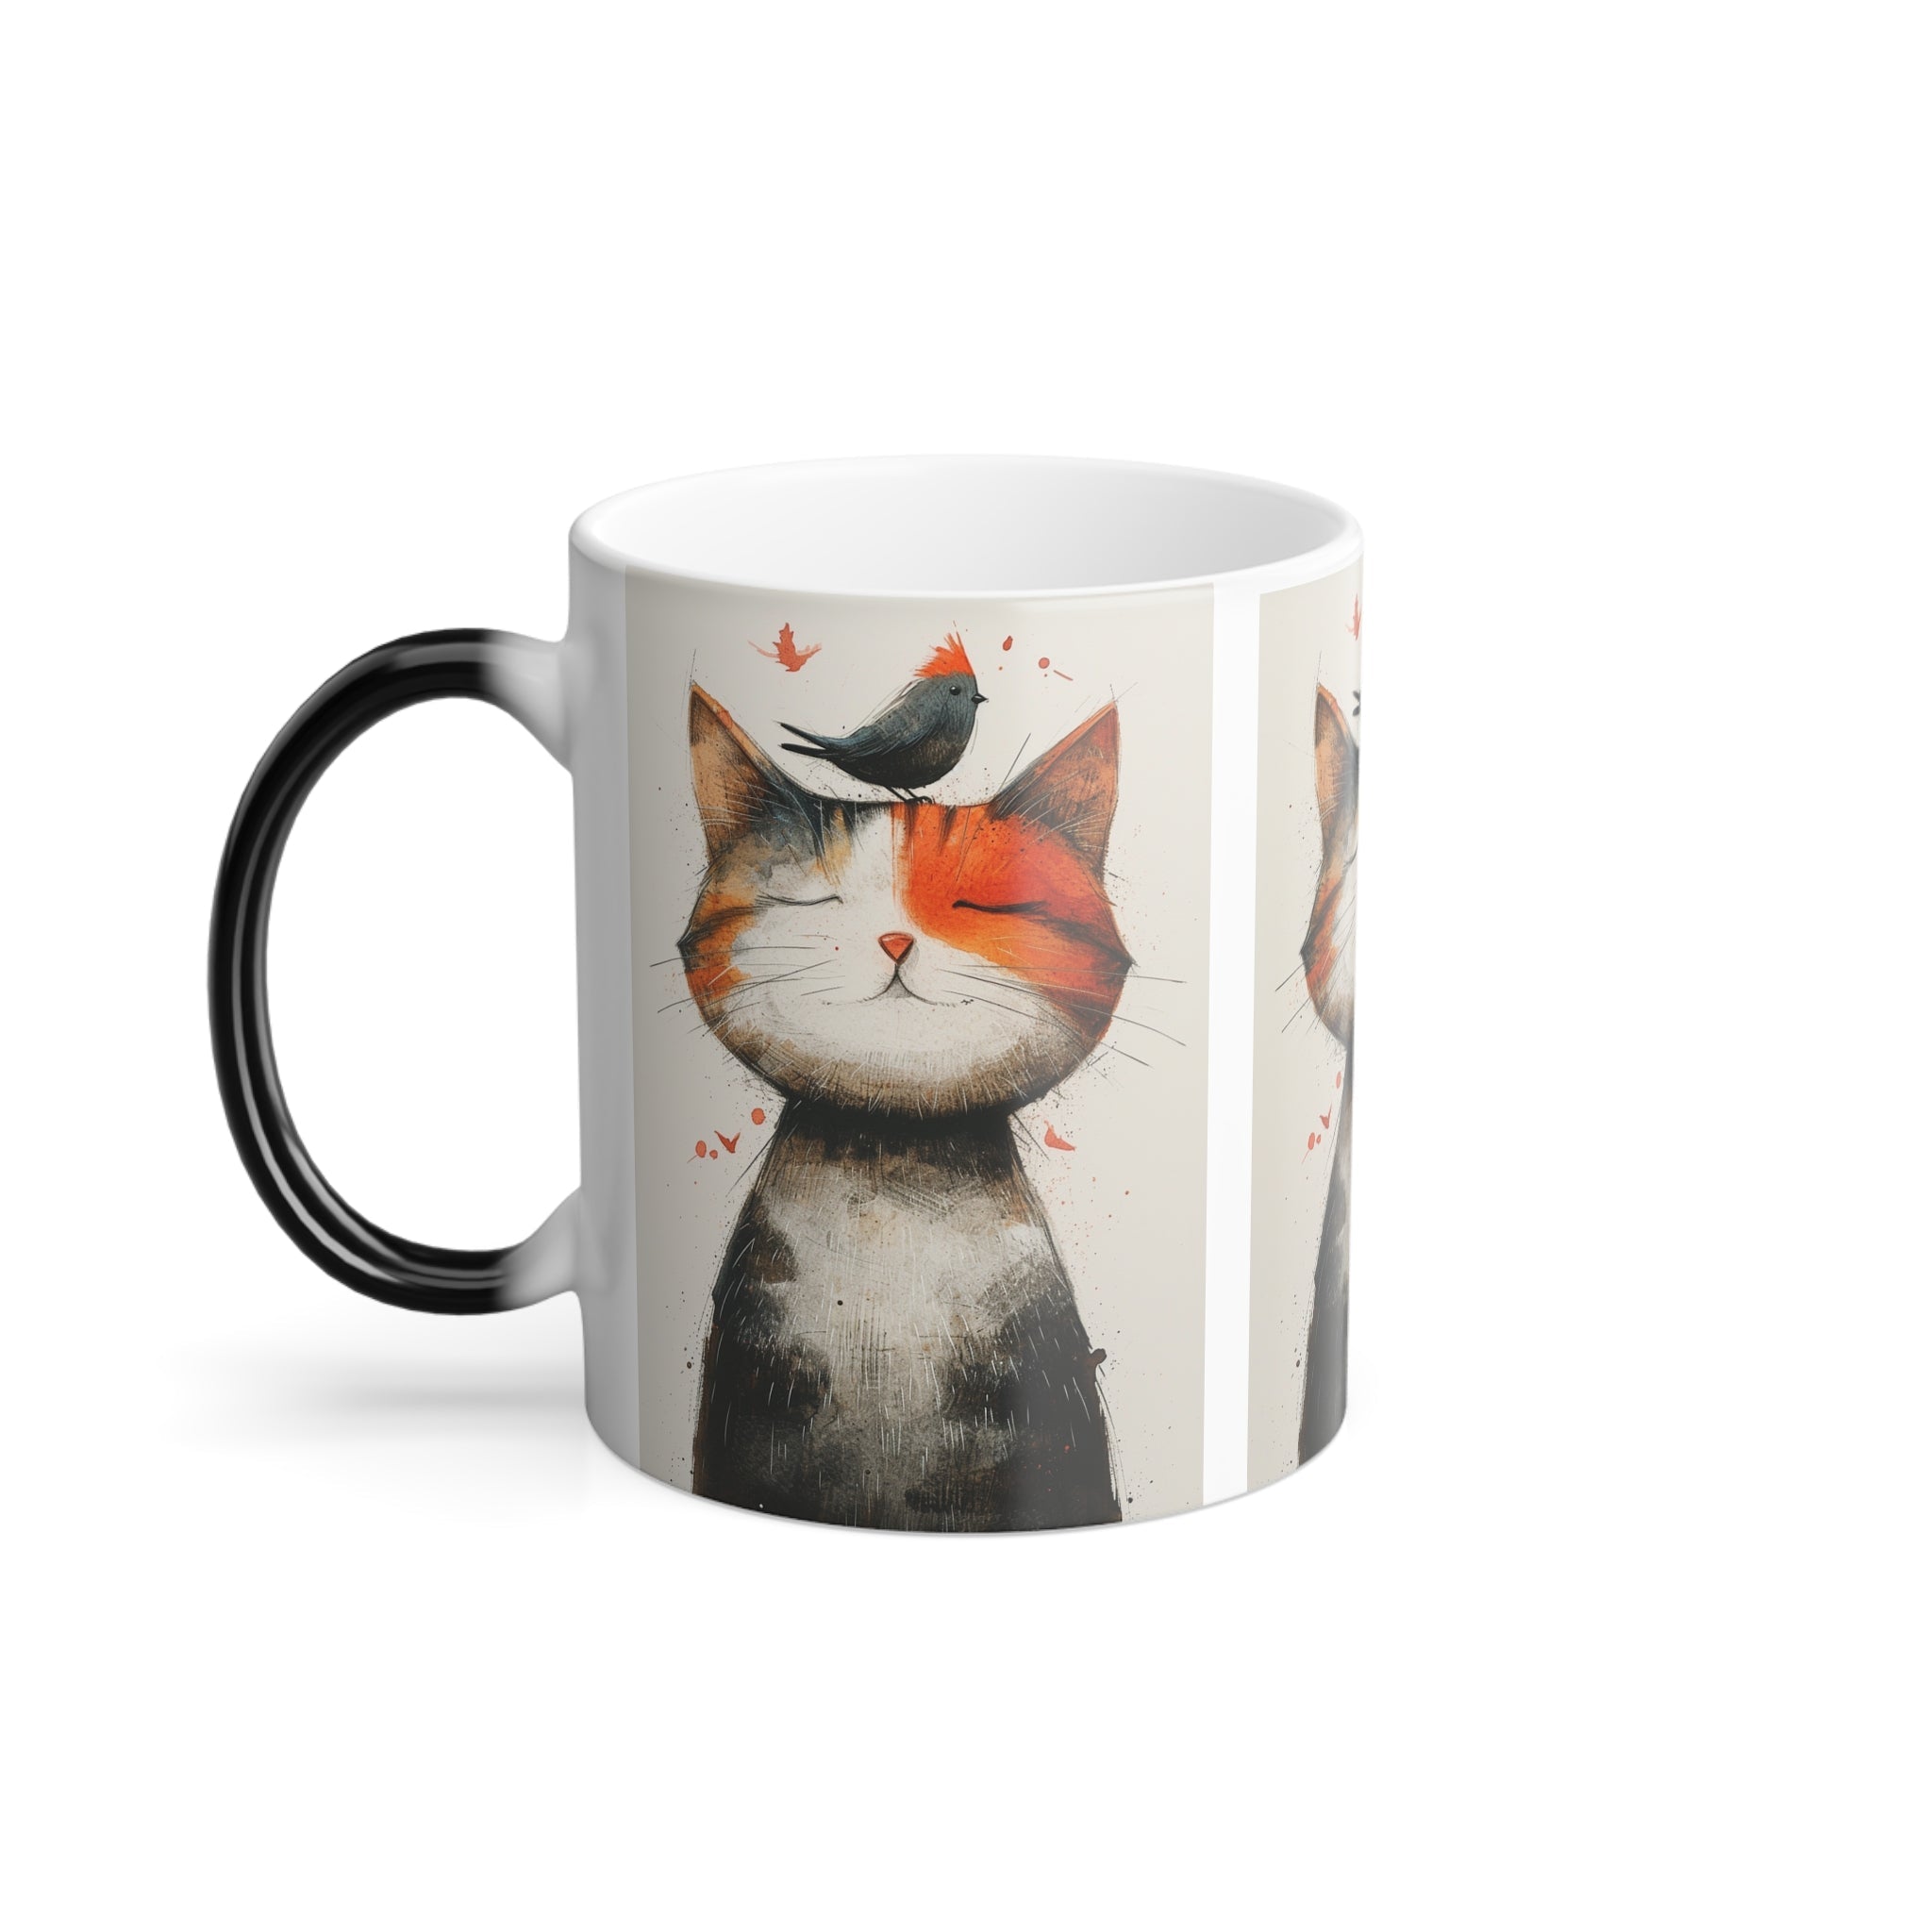 Combo Set 🐱🐦 Cat and Trusting Red Sparrow Friend Color Morphing Mug and Gratitude Journal - 11oz | Magic Heat-Changing Ceramic Cup for Cat Lovers | Unique Color-Shift Coffee Mug